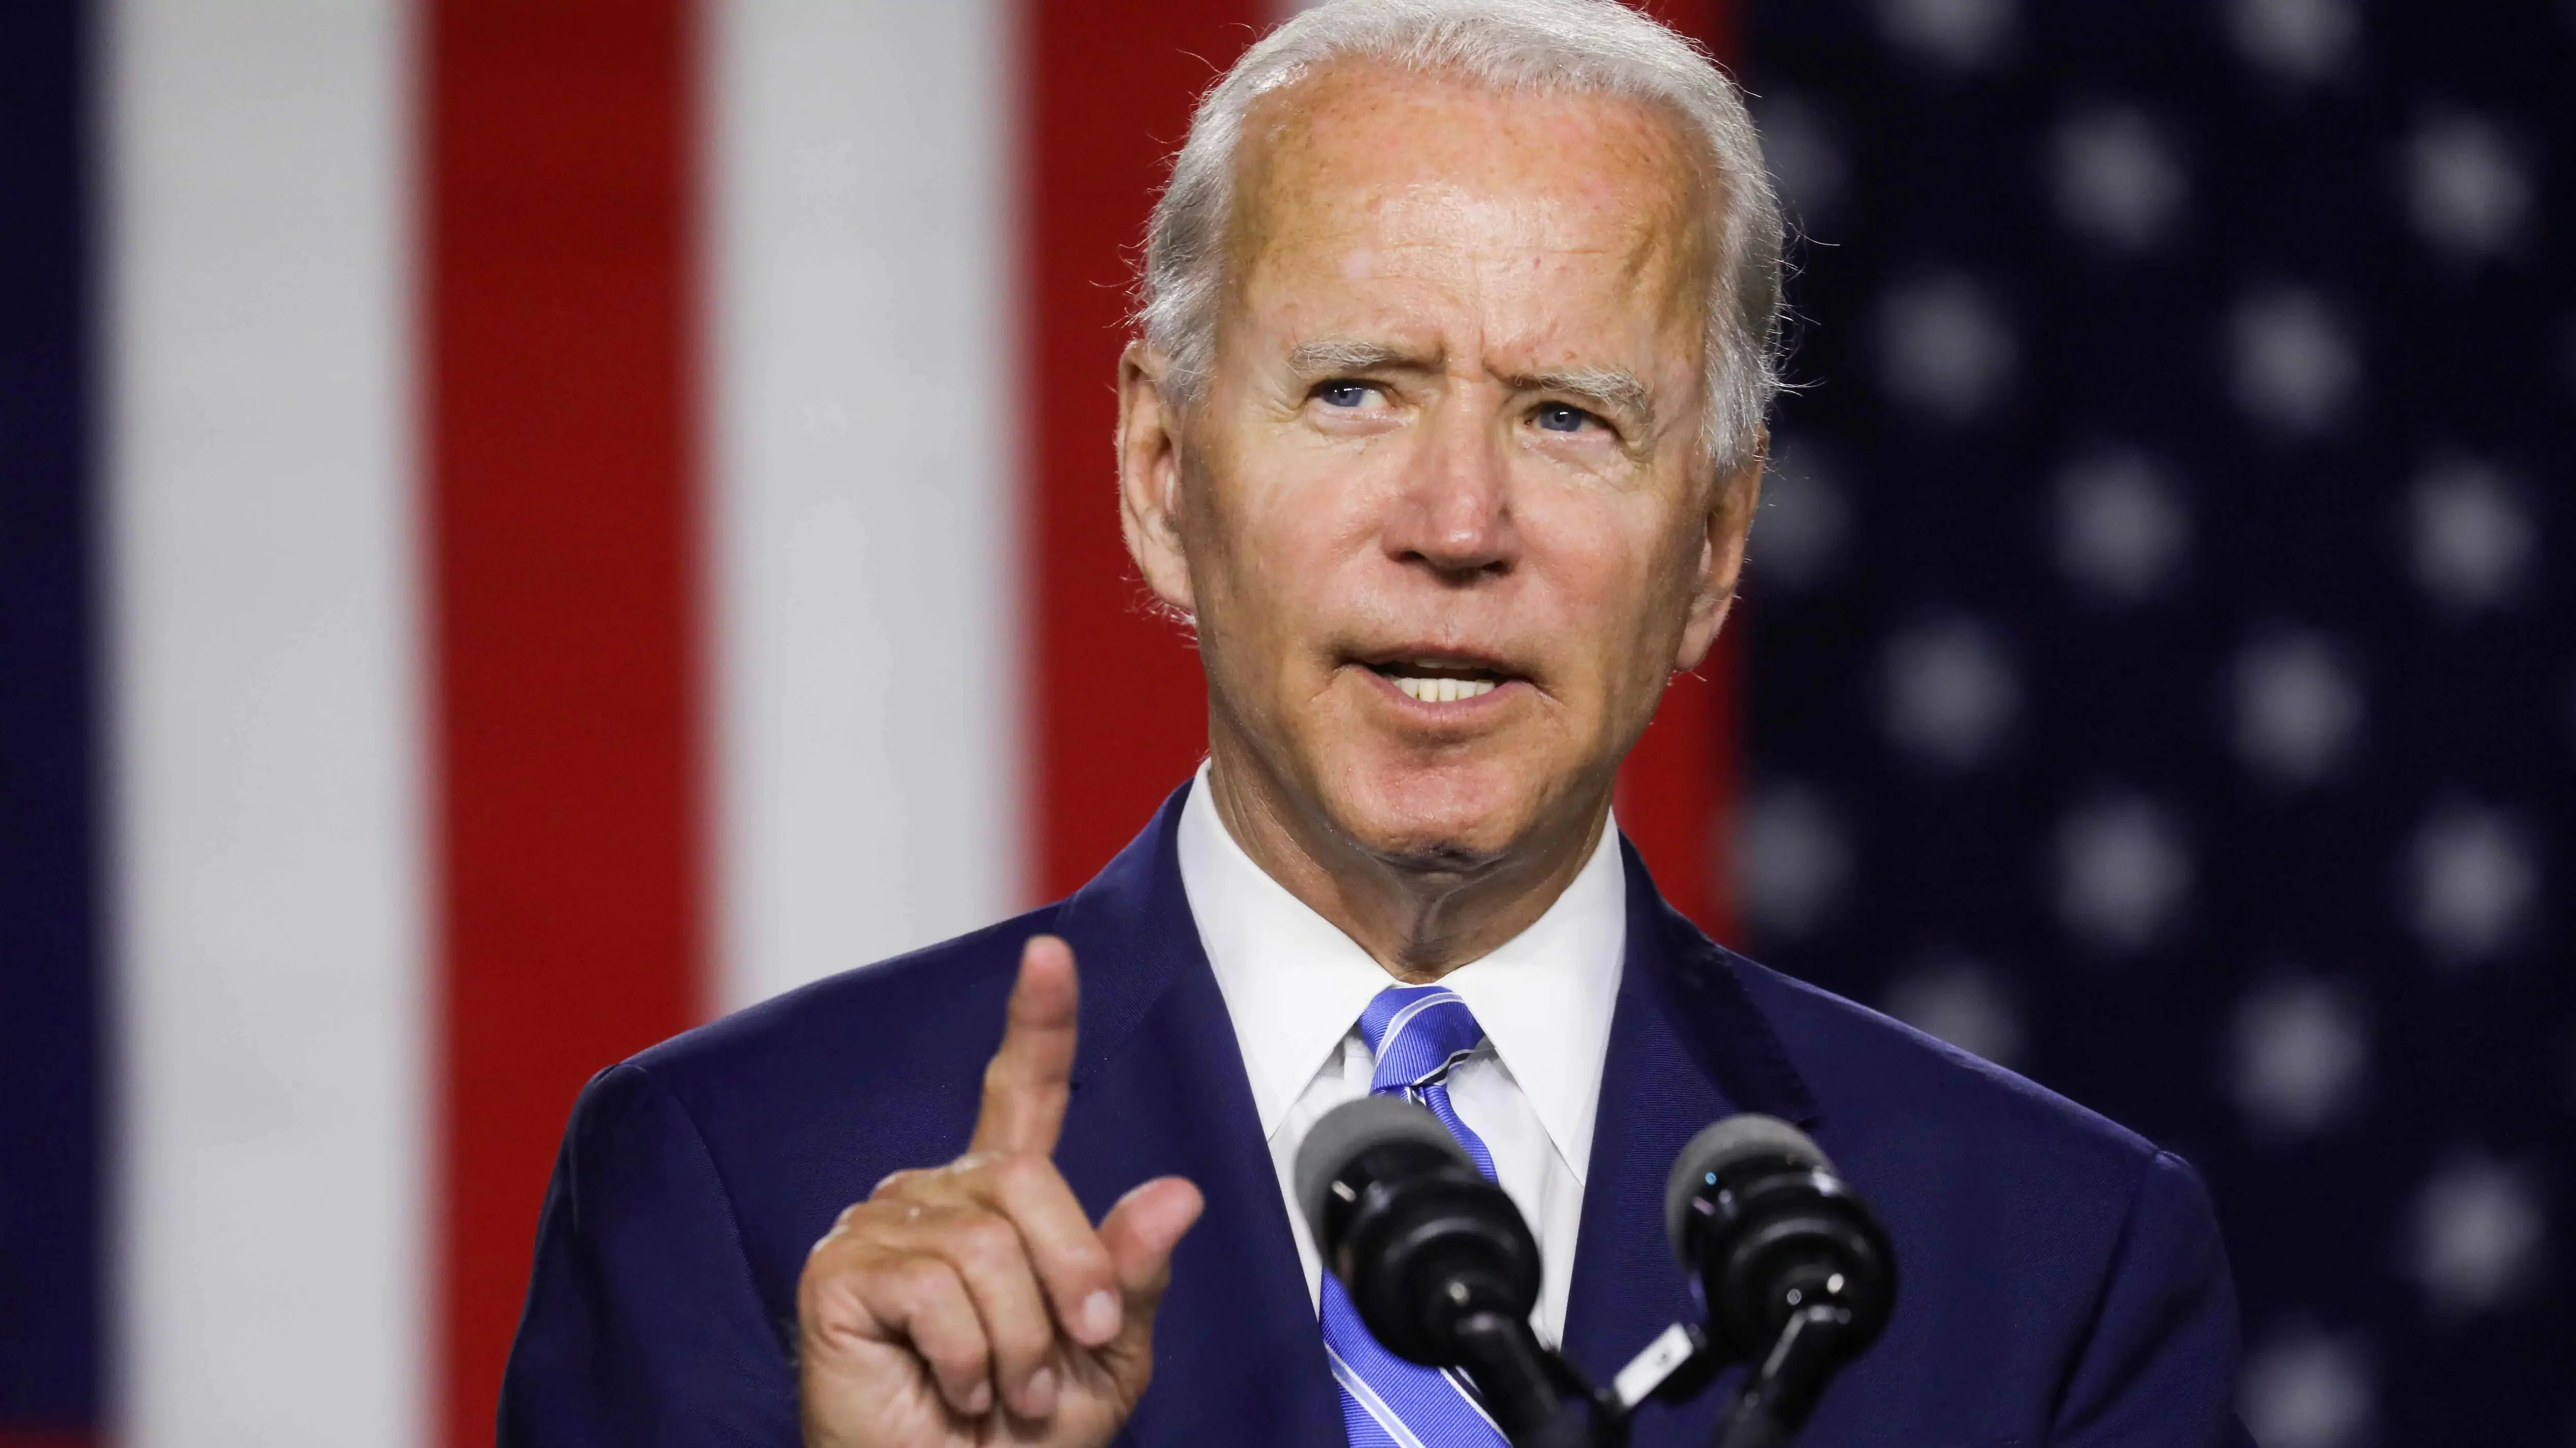 Joe Biden says Donald Trump 'just does not care' about US economic pain from COVID pandemic